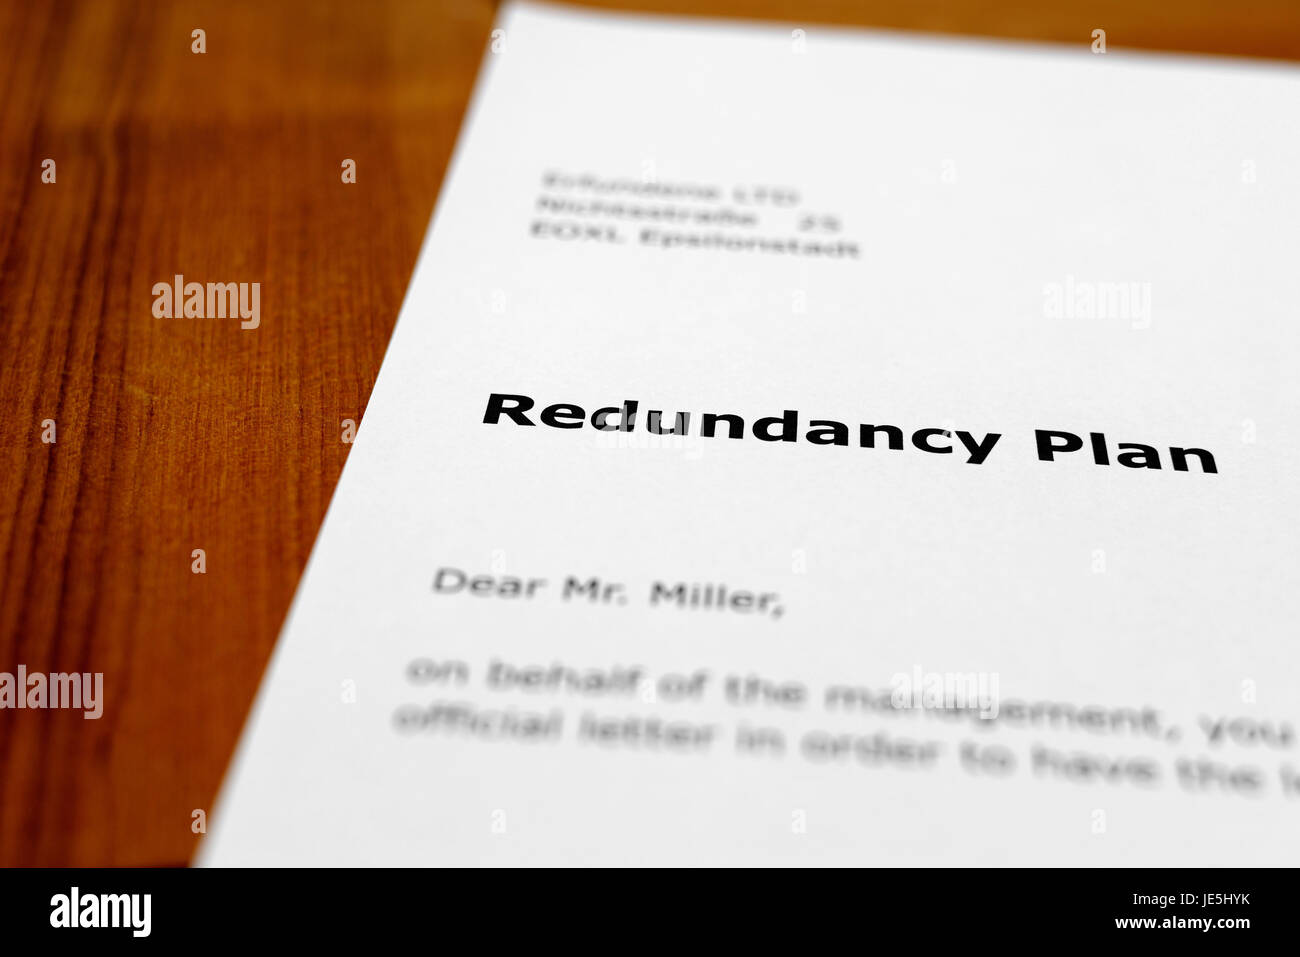 A letter on a wooden table - redundancy plan Stock Photo